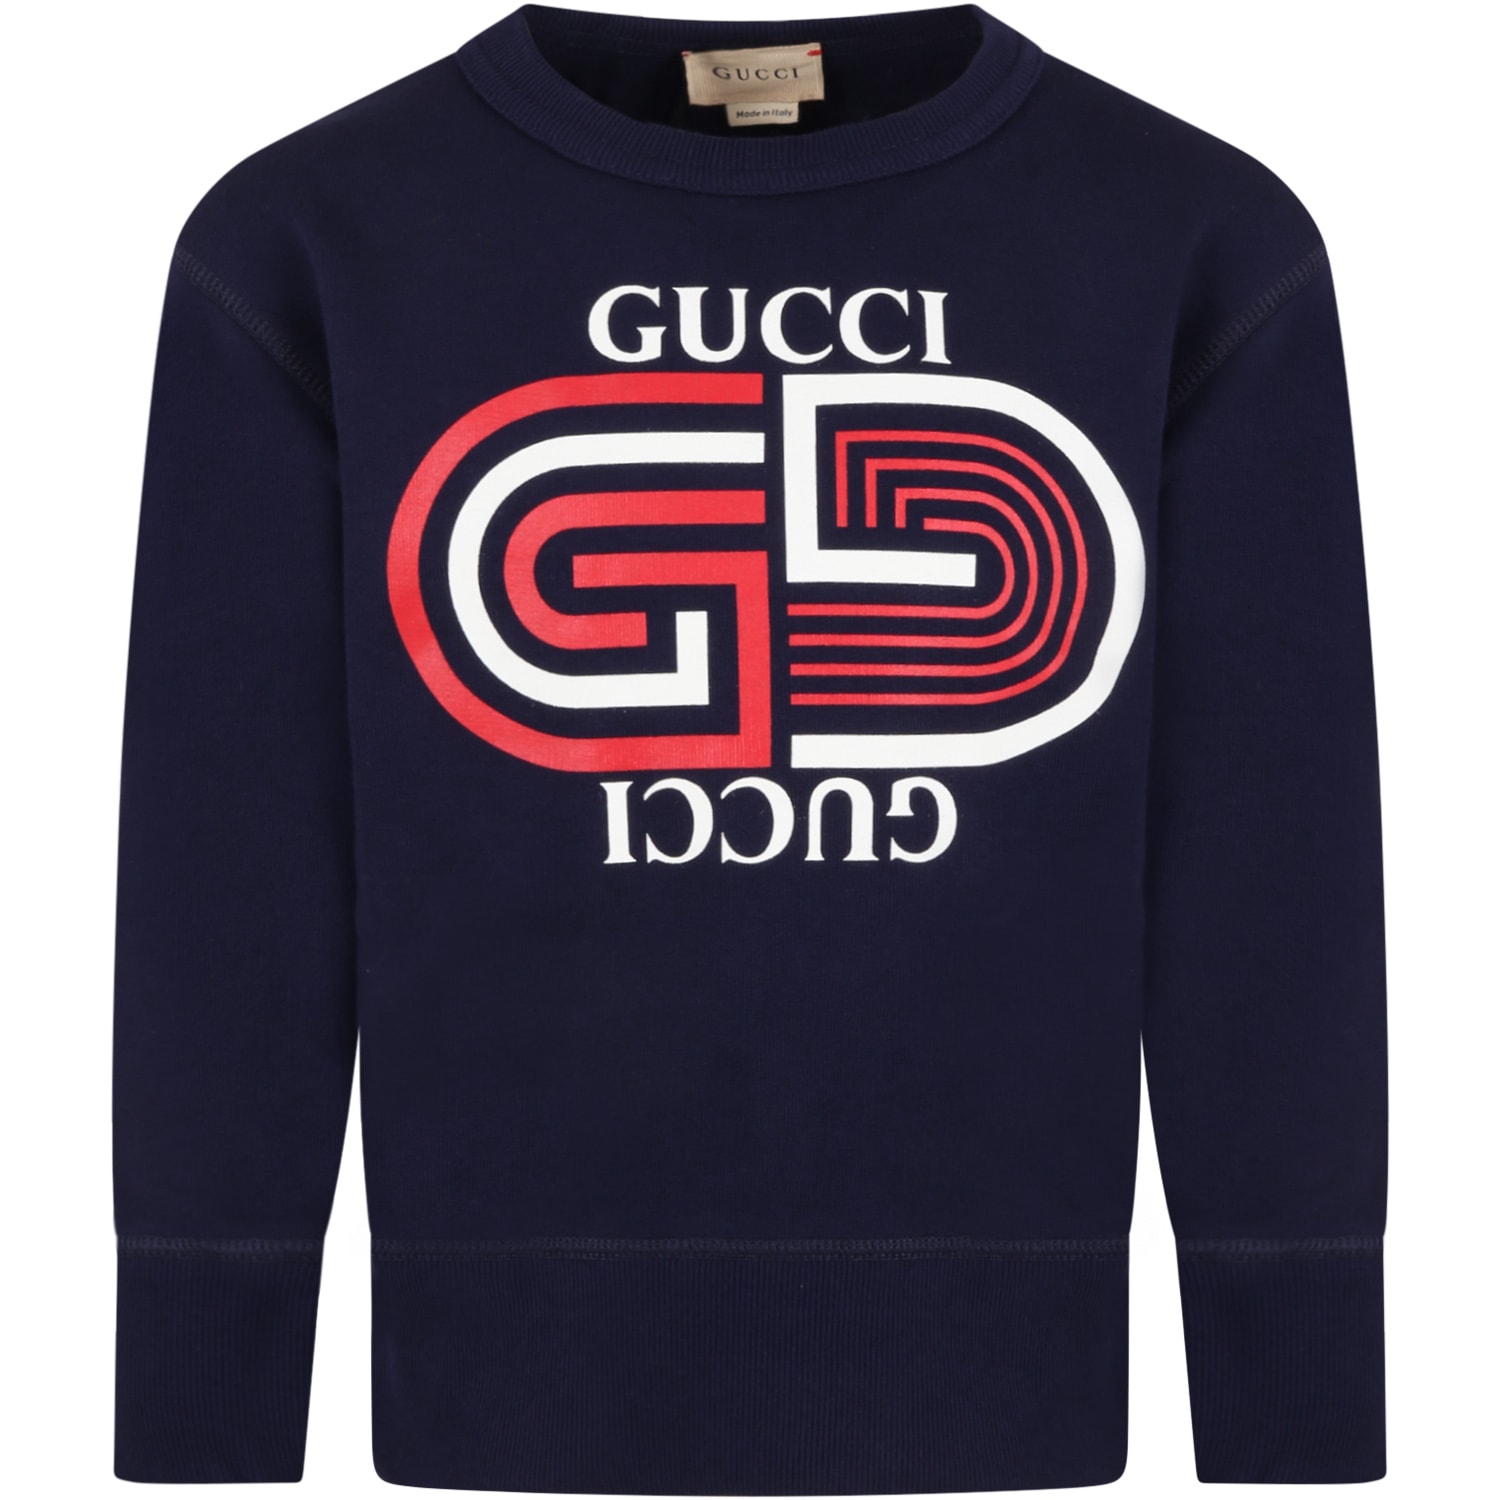 Gucci Blue Sweatshirt For Kids With Red And White Logo